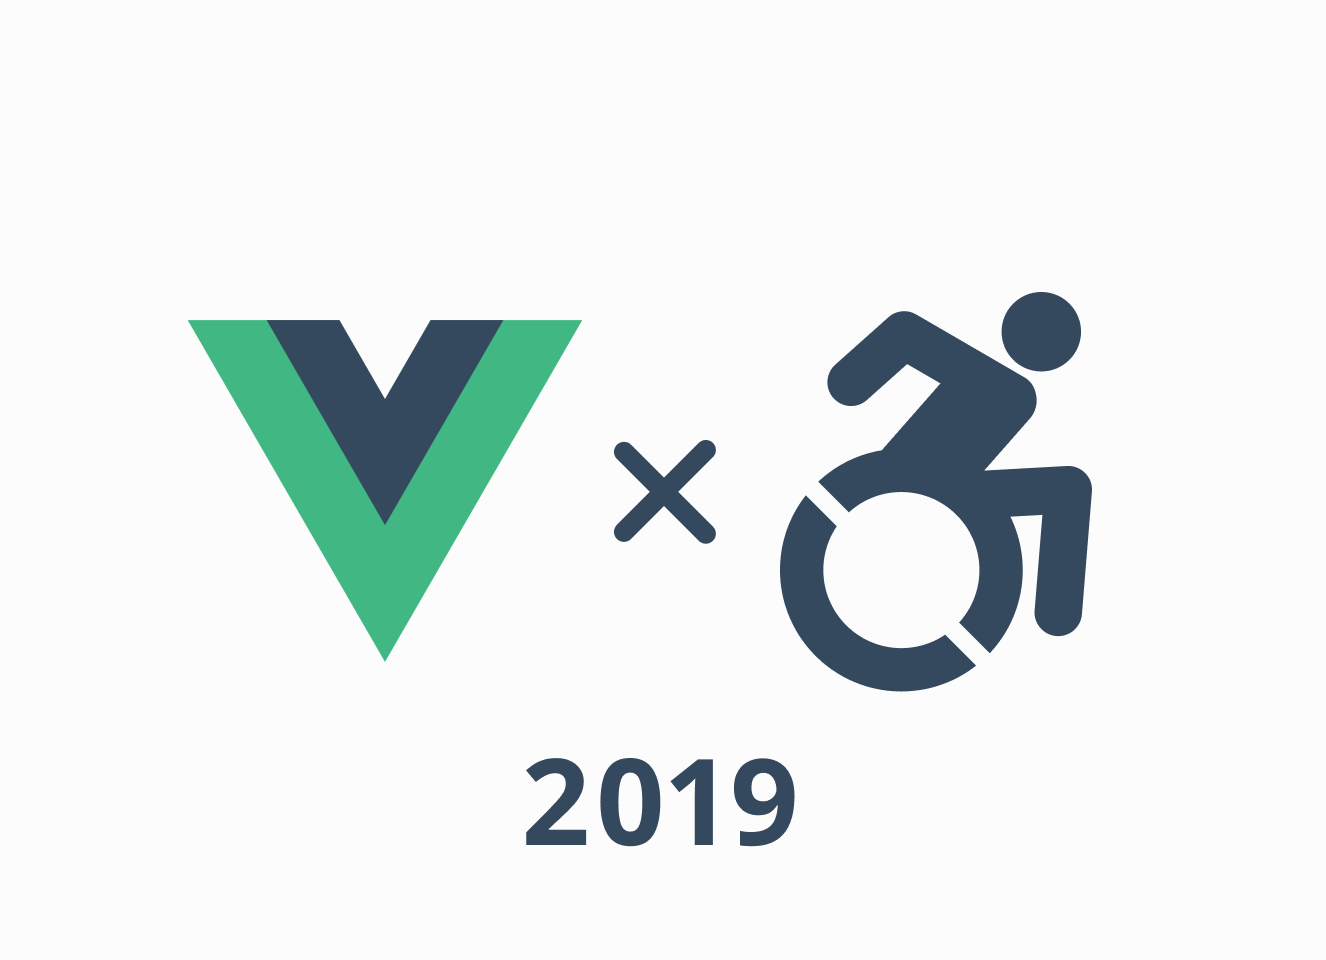 Photo: About accessibility with Vue.js - 2019